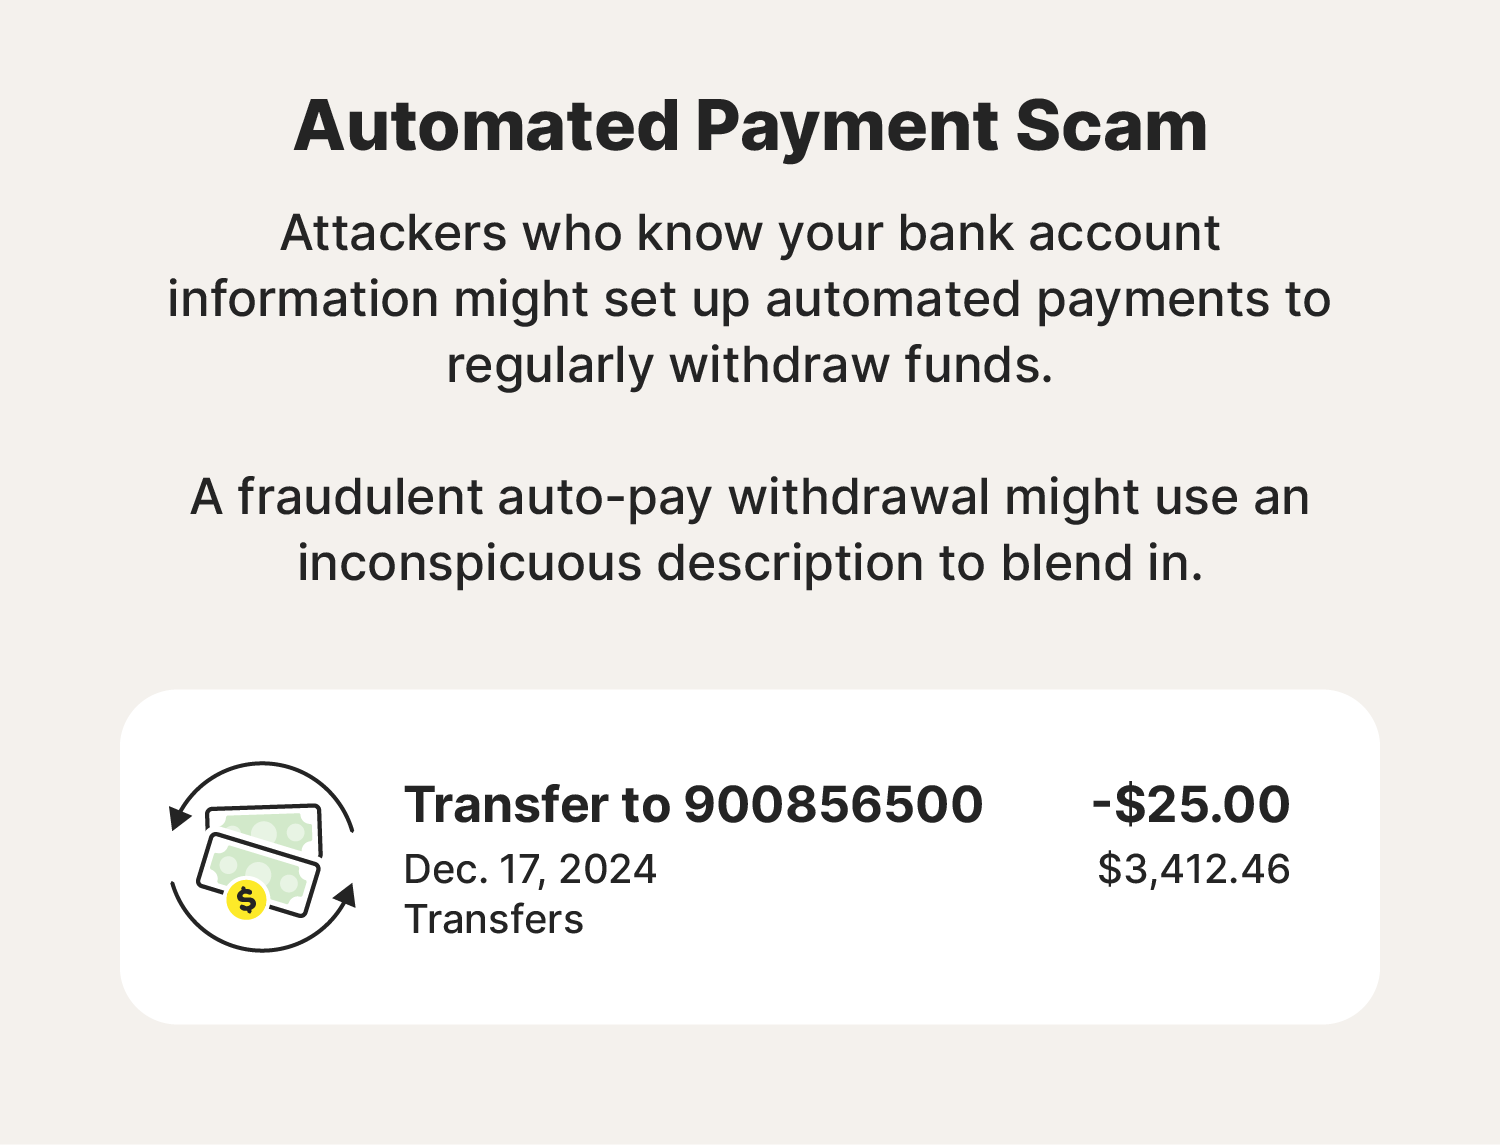 An example of what a fraudulent withdrawal in an automated payment scam might look like.